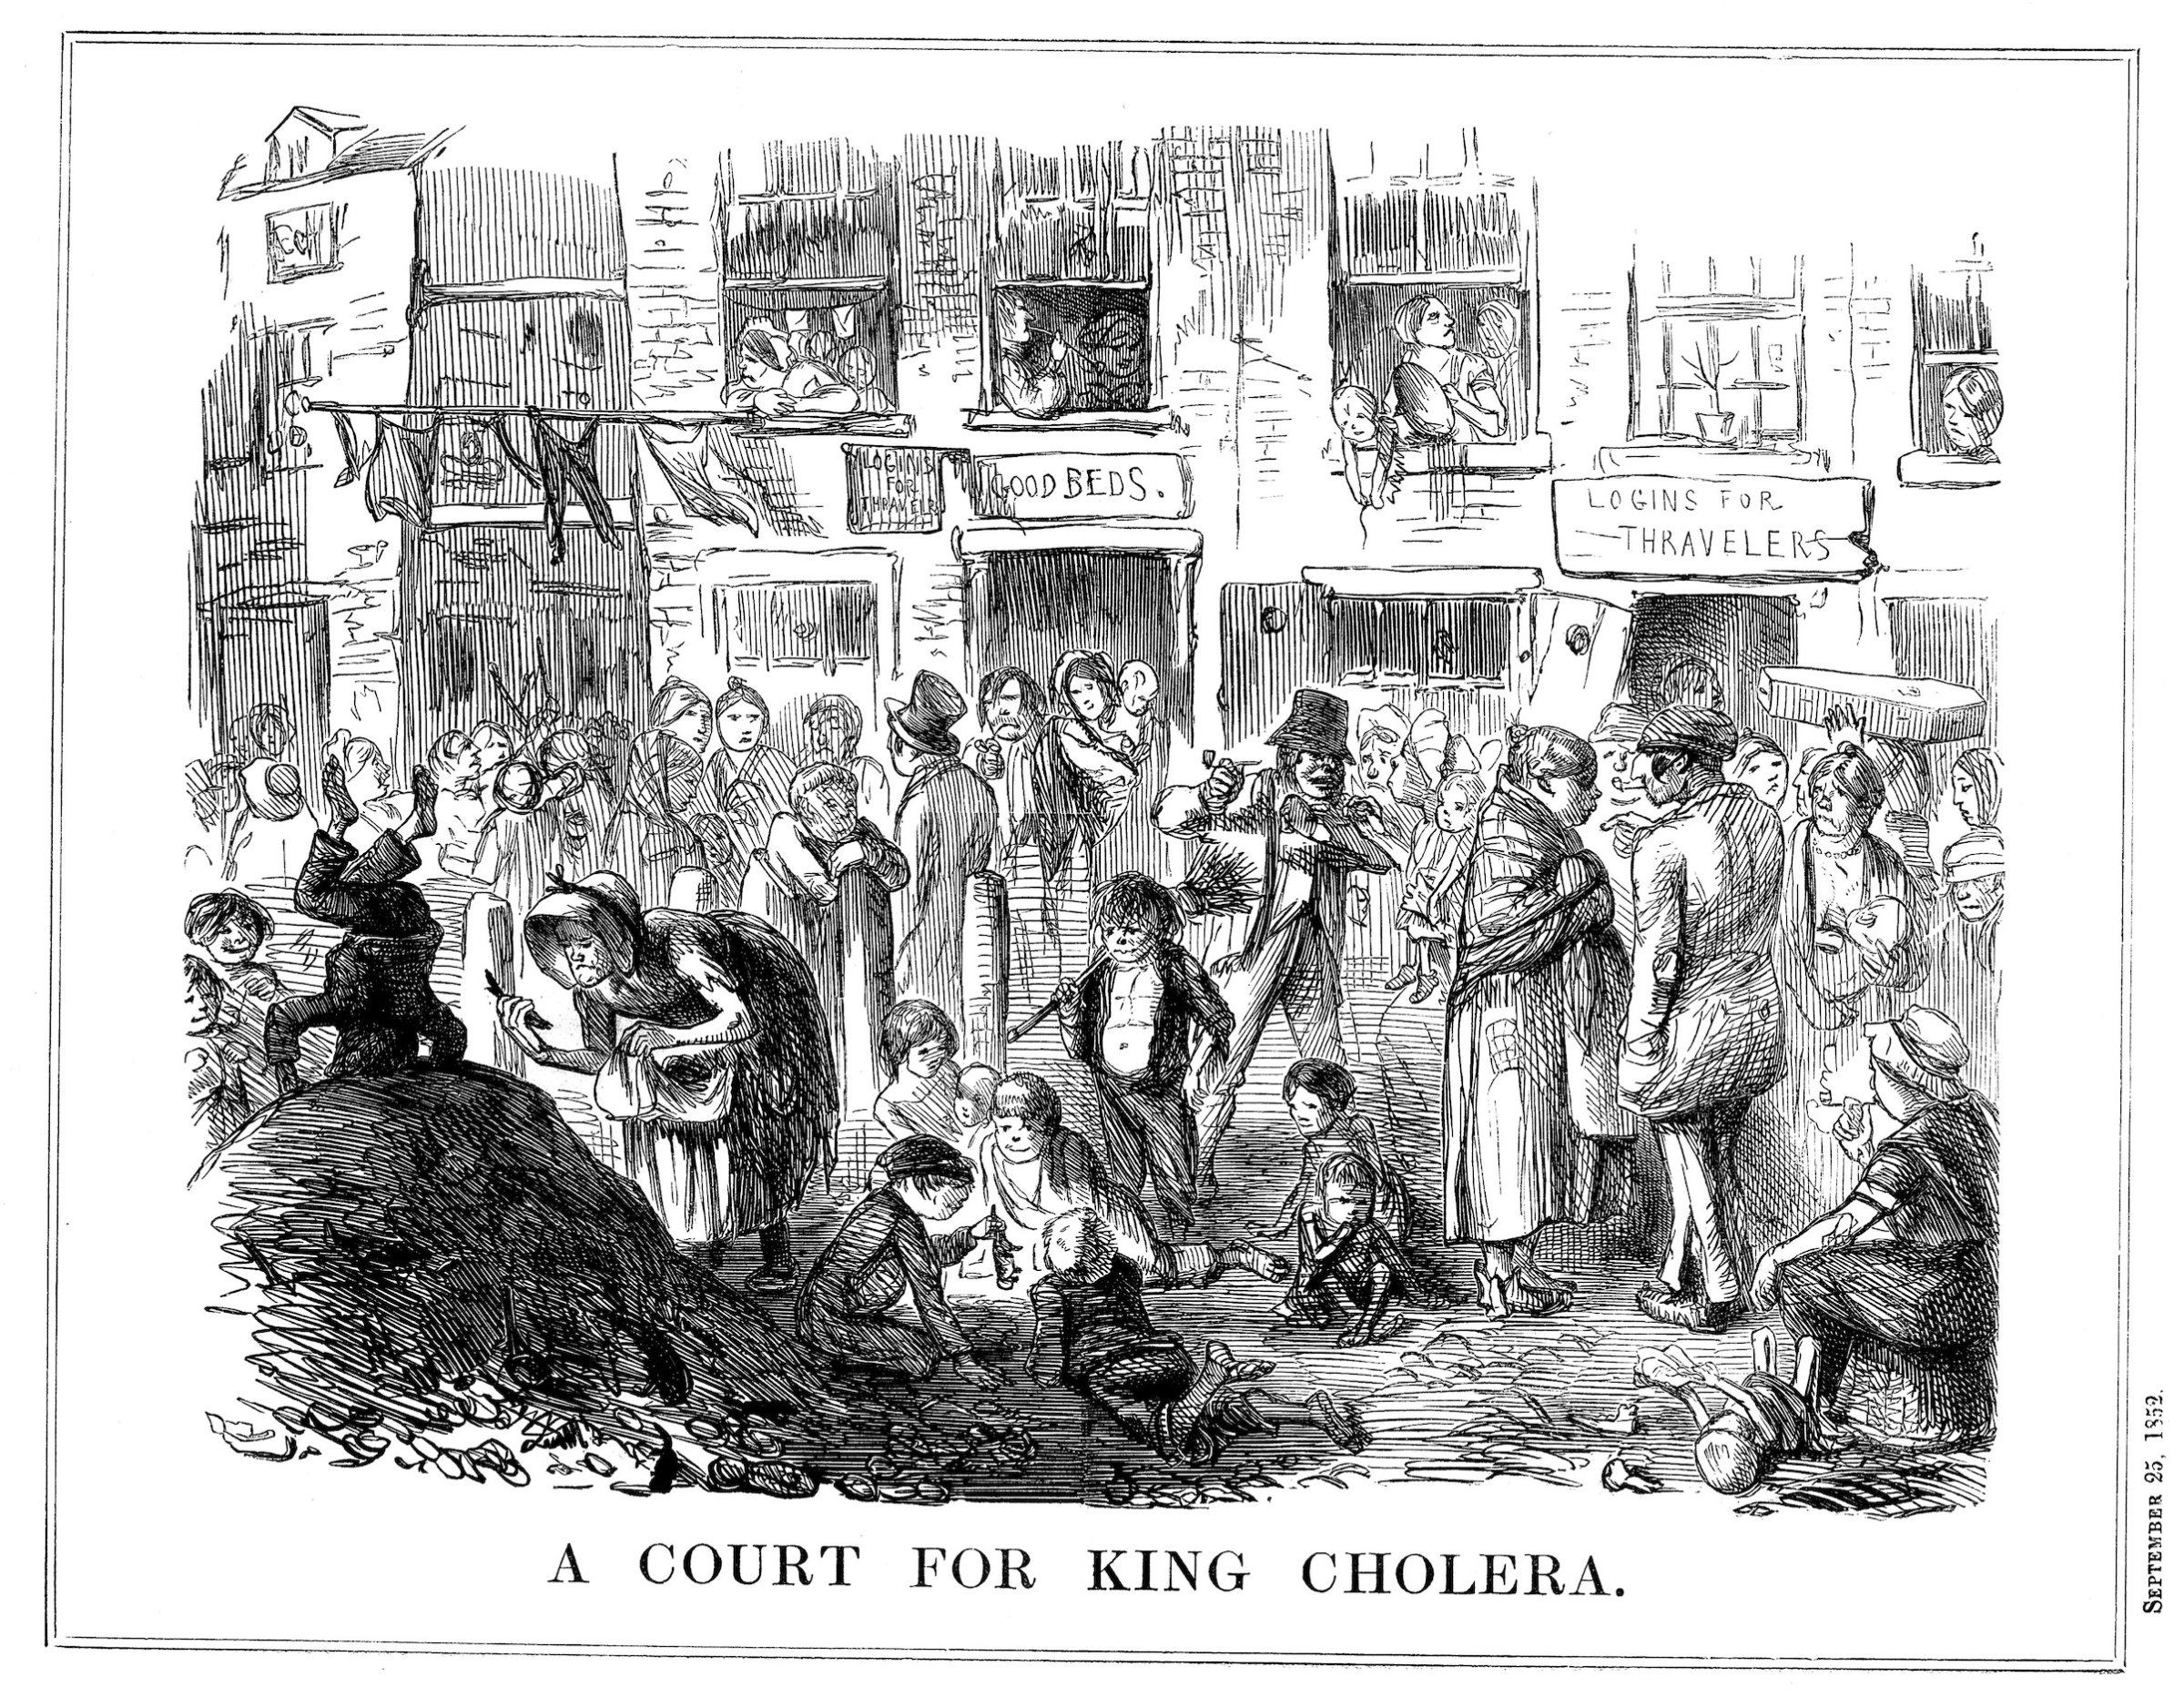 'A Court for King Cholera', 1852.